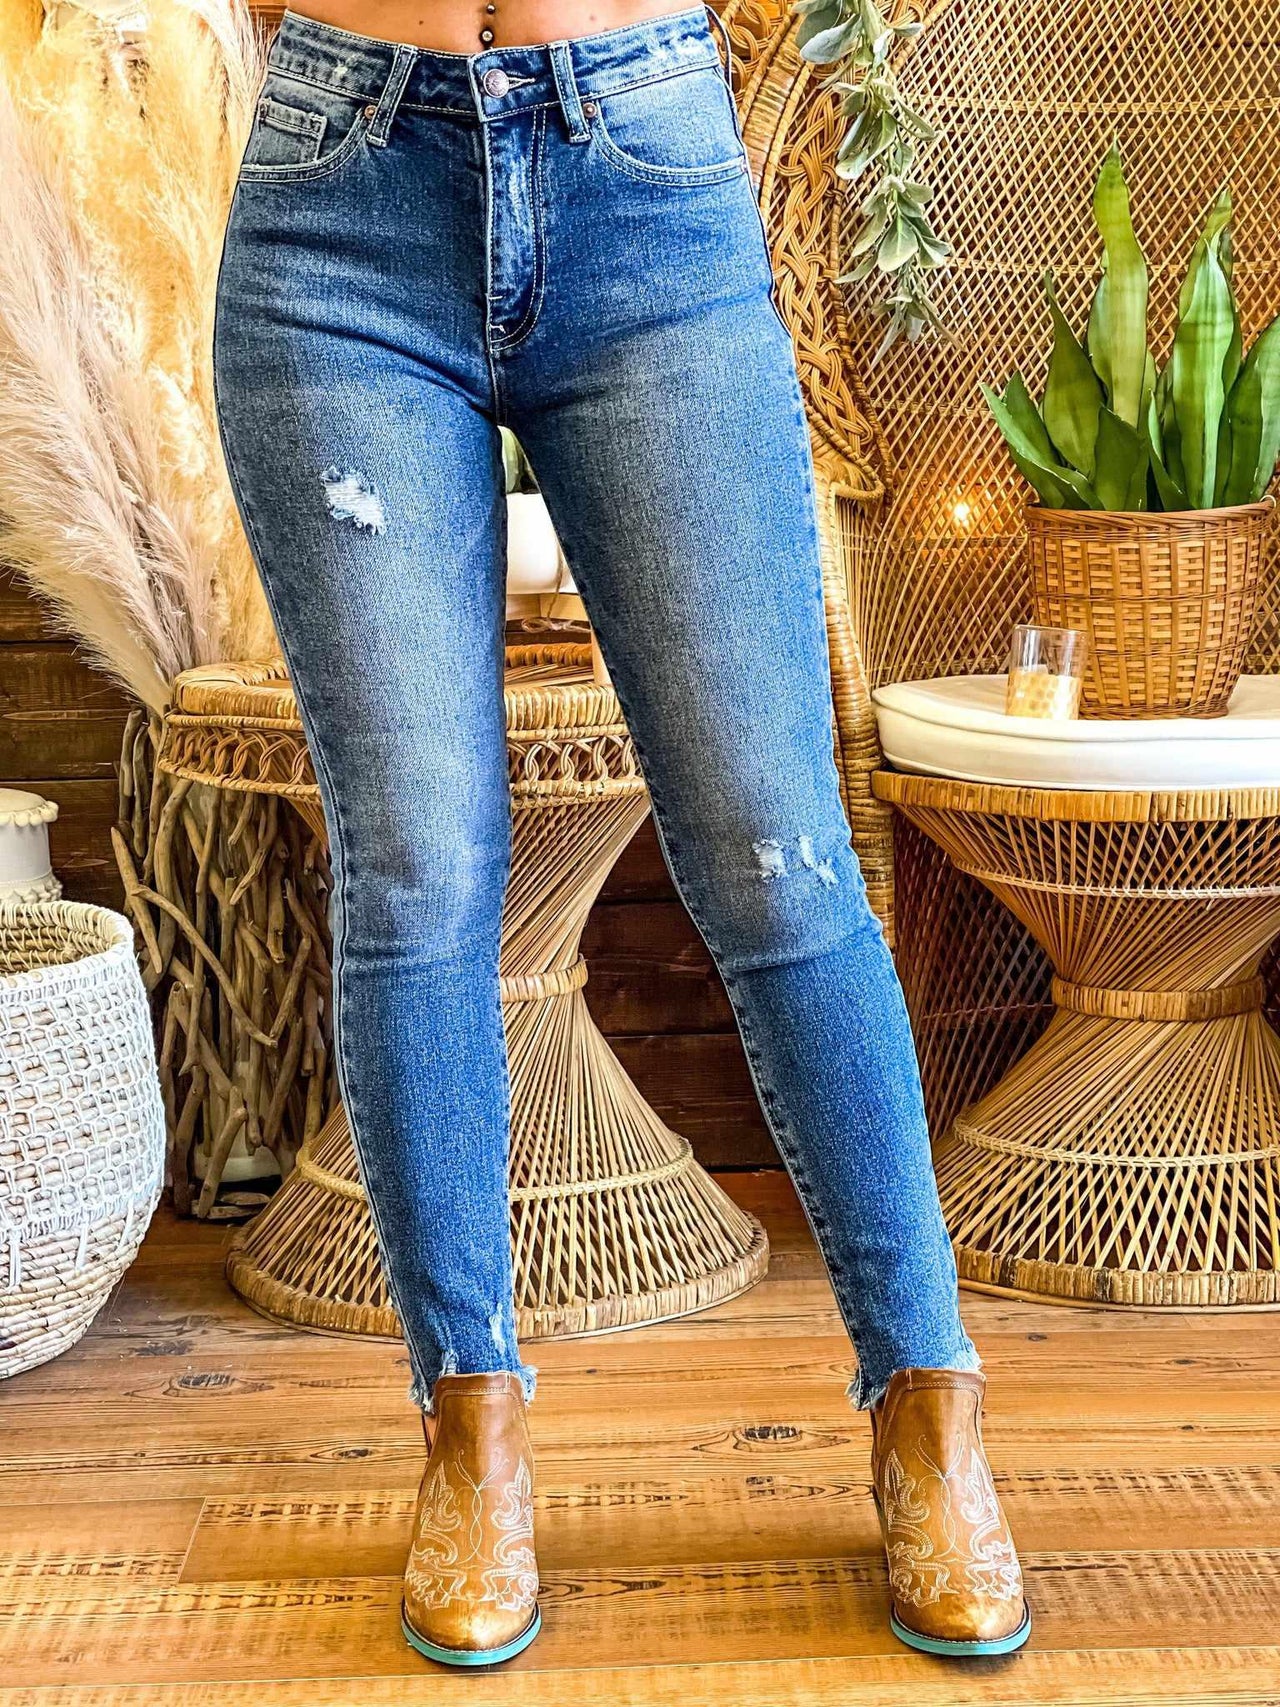 destroyed jeans womens